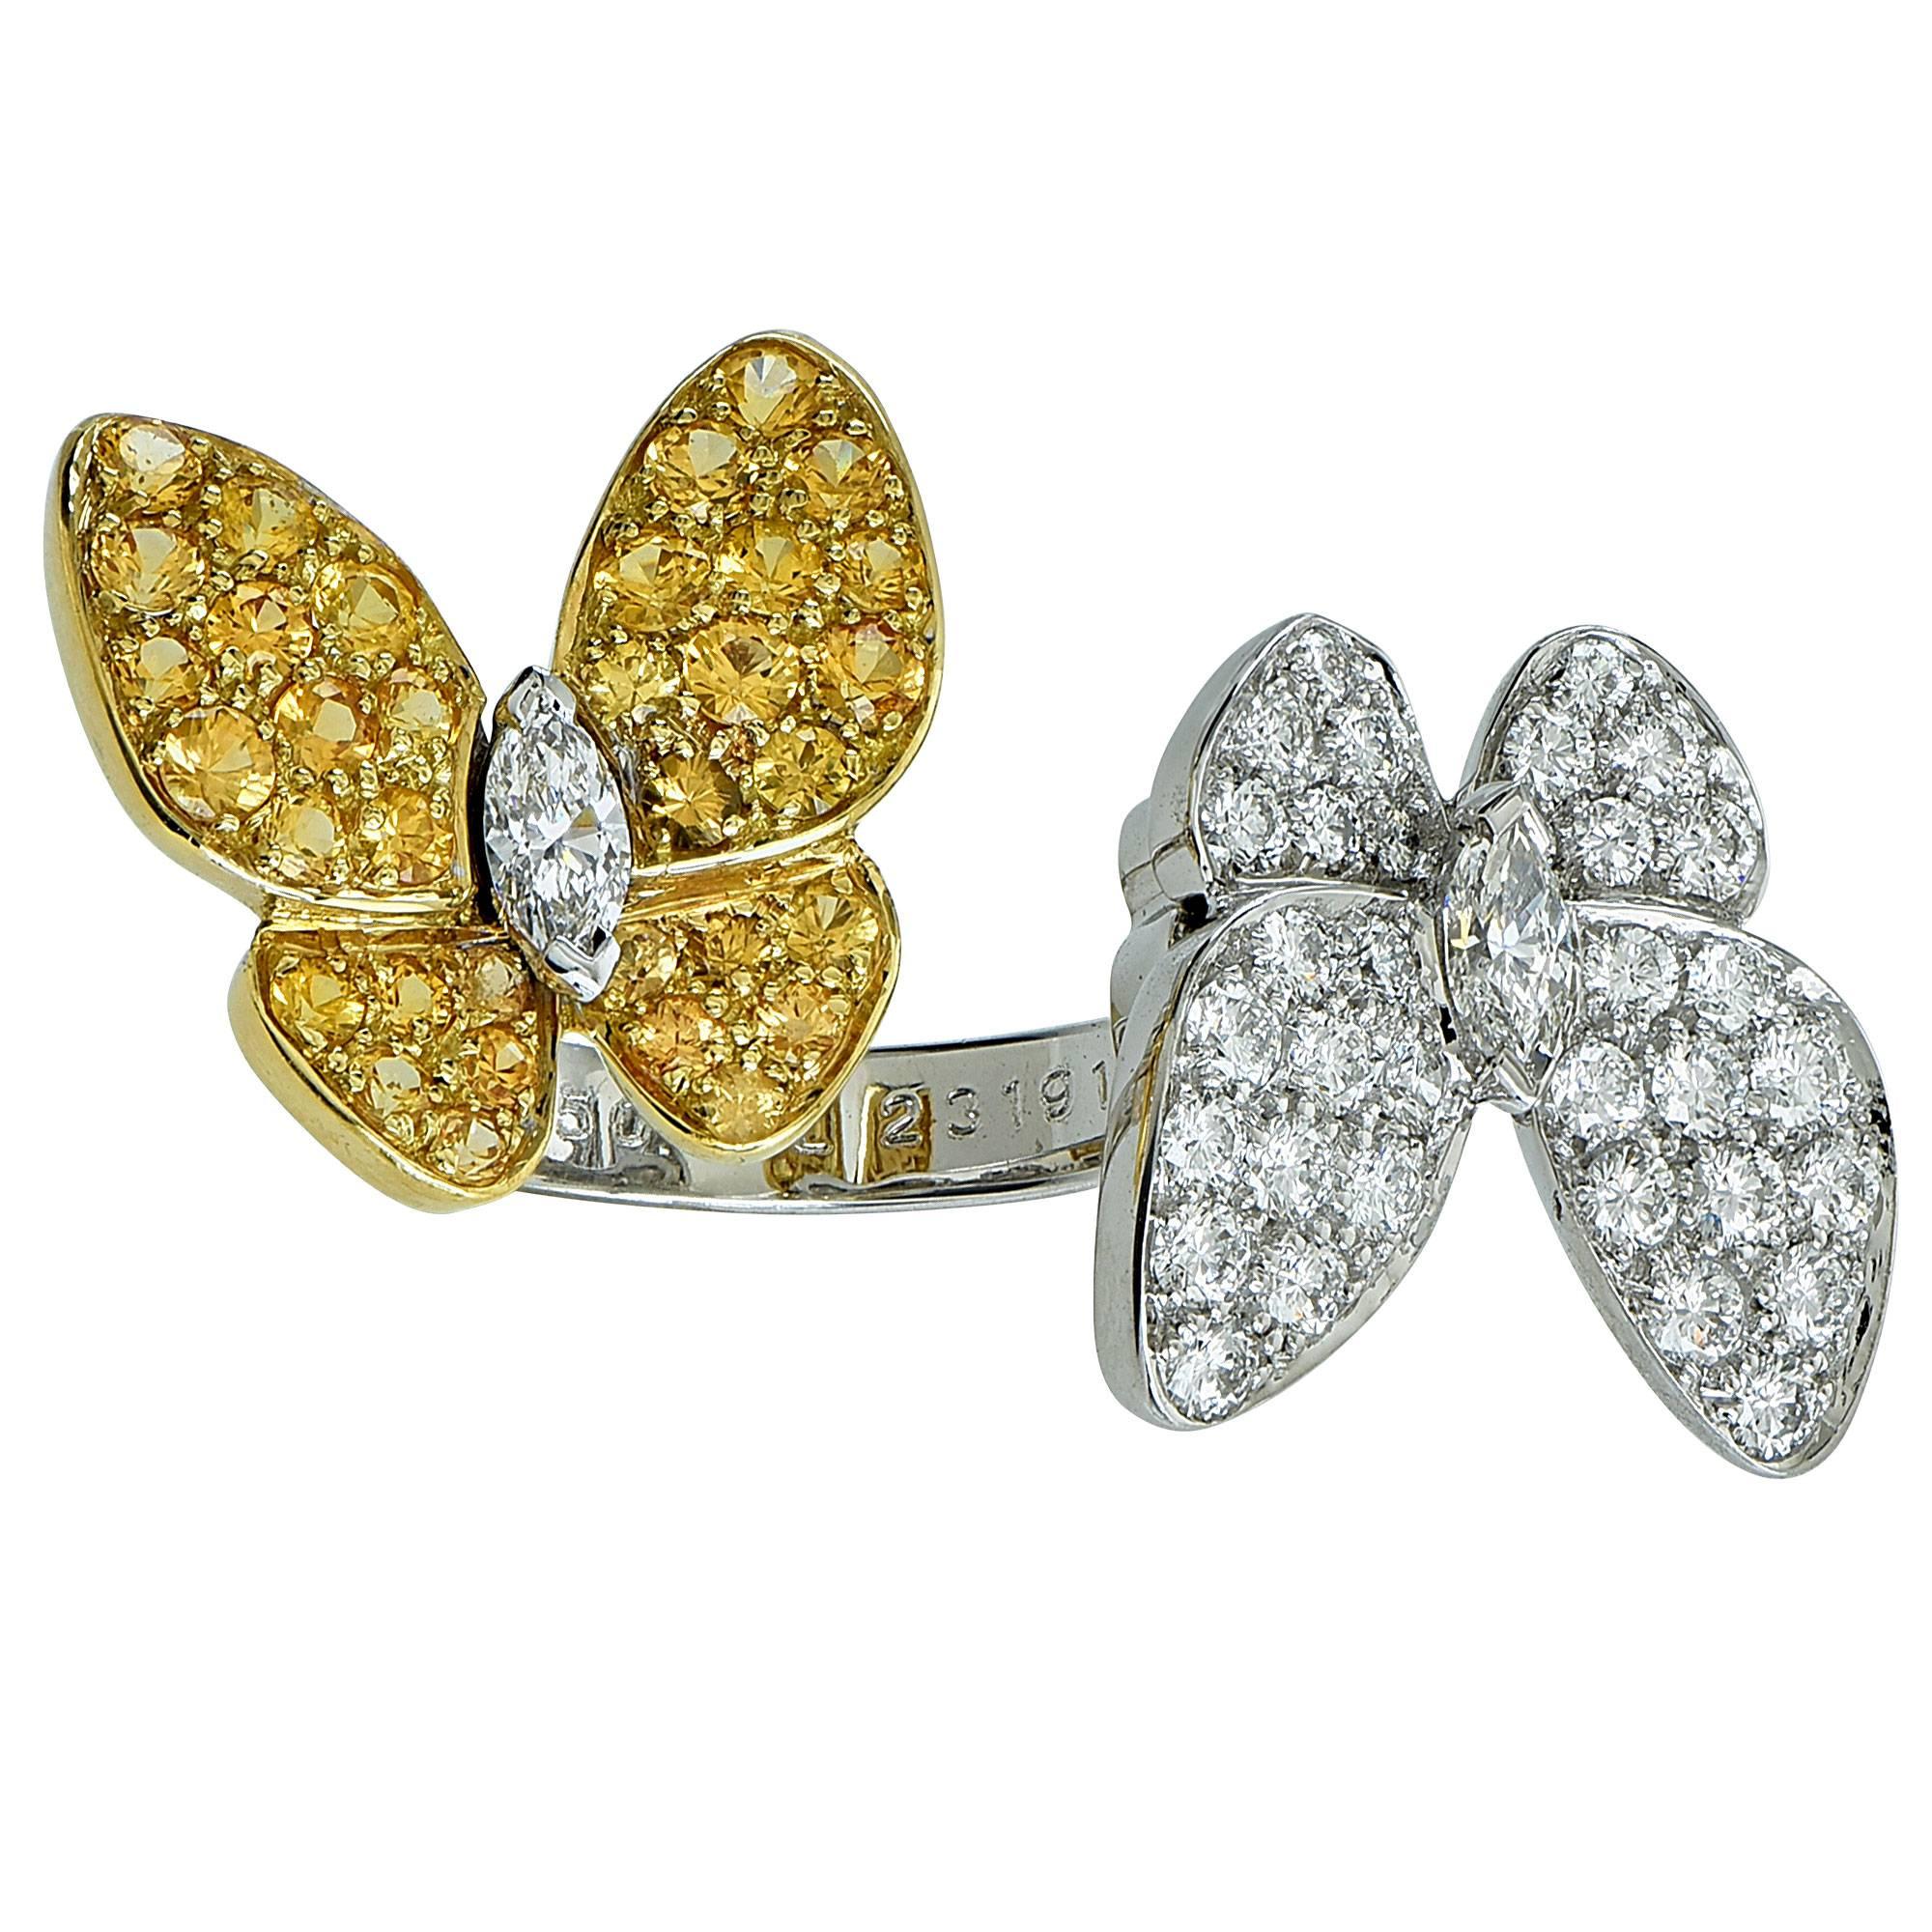 Authentic Van Cleef and Arpels two butterfly between the finger ring from the flying beauties collection. This unique ring features .99cts of D-F color, Internally flawless to VVS clarity round brilliant and marquise cut diamonds accented by .88